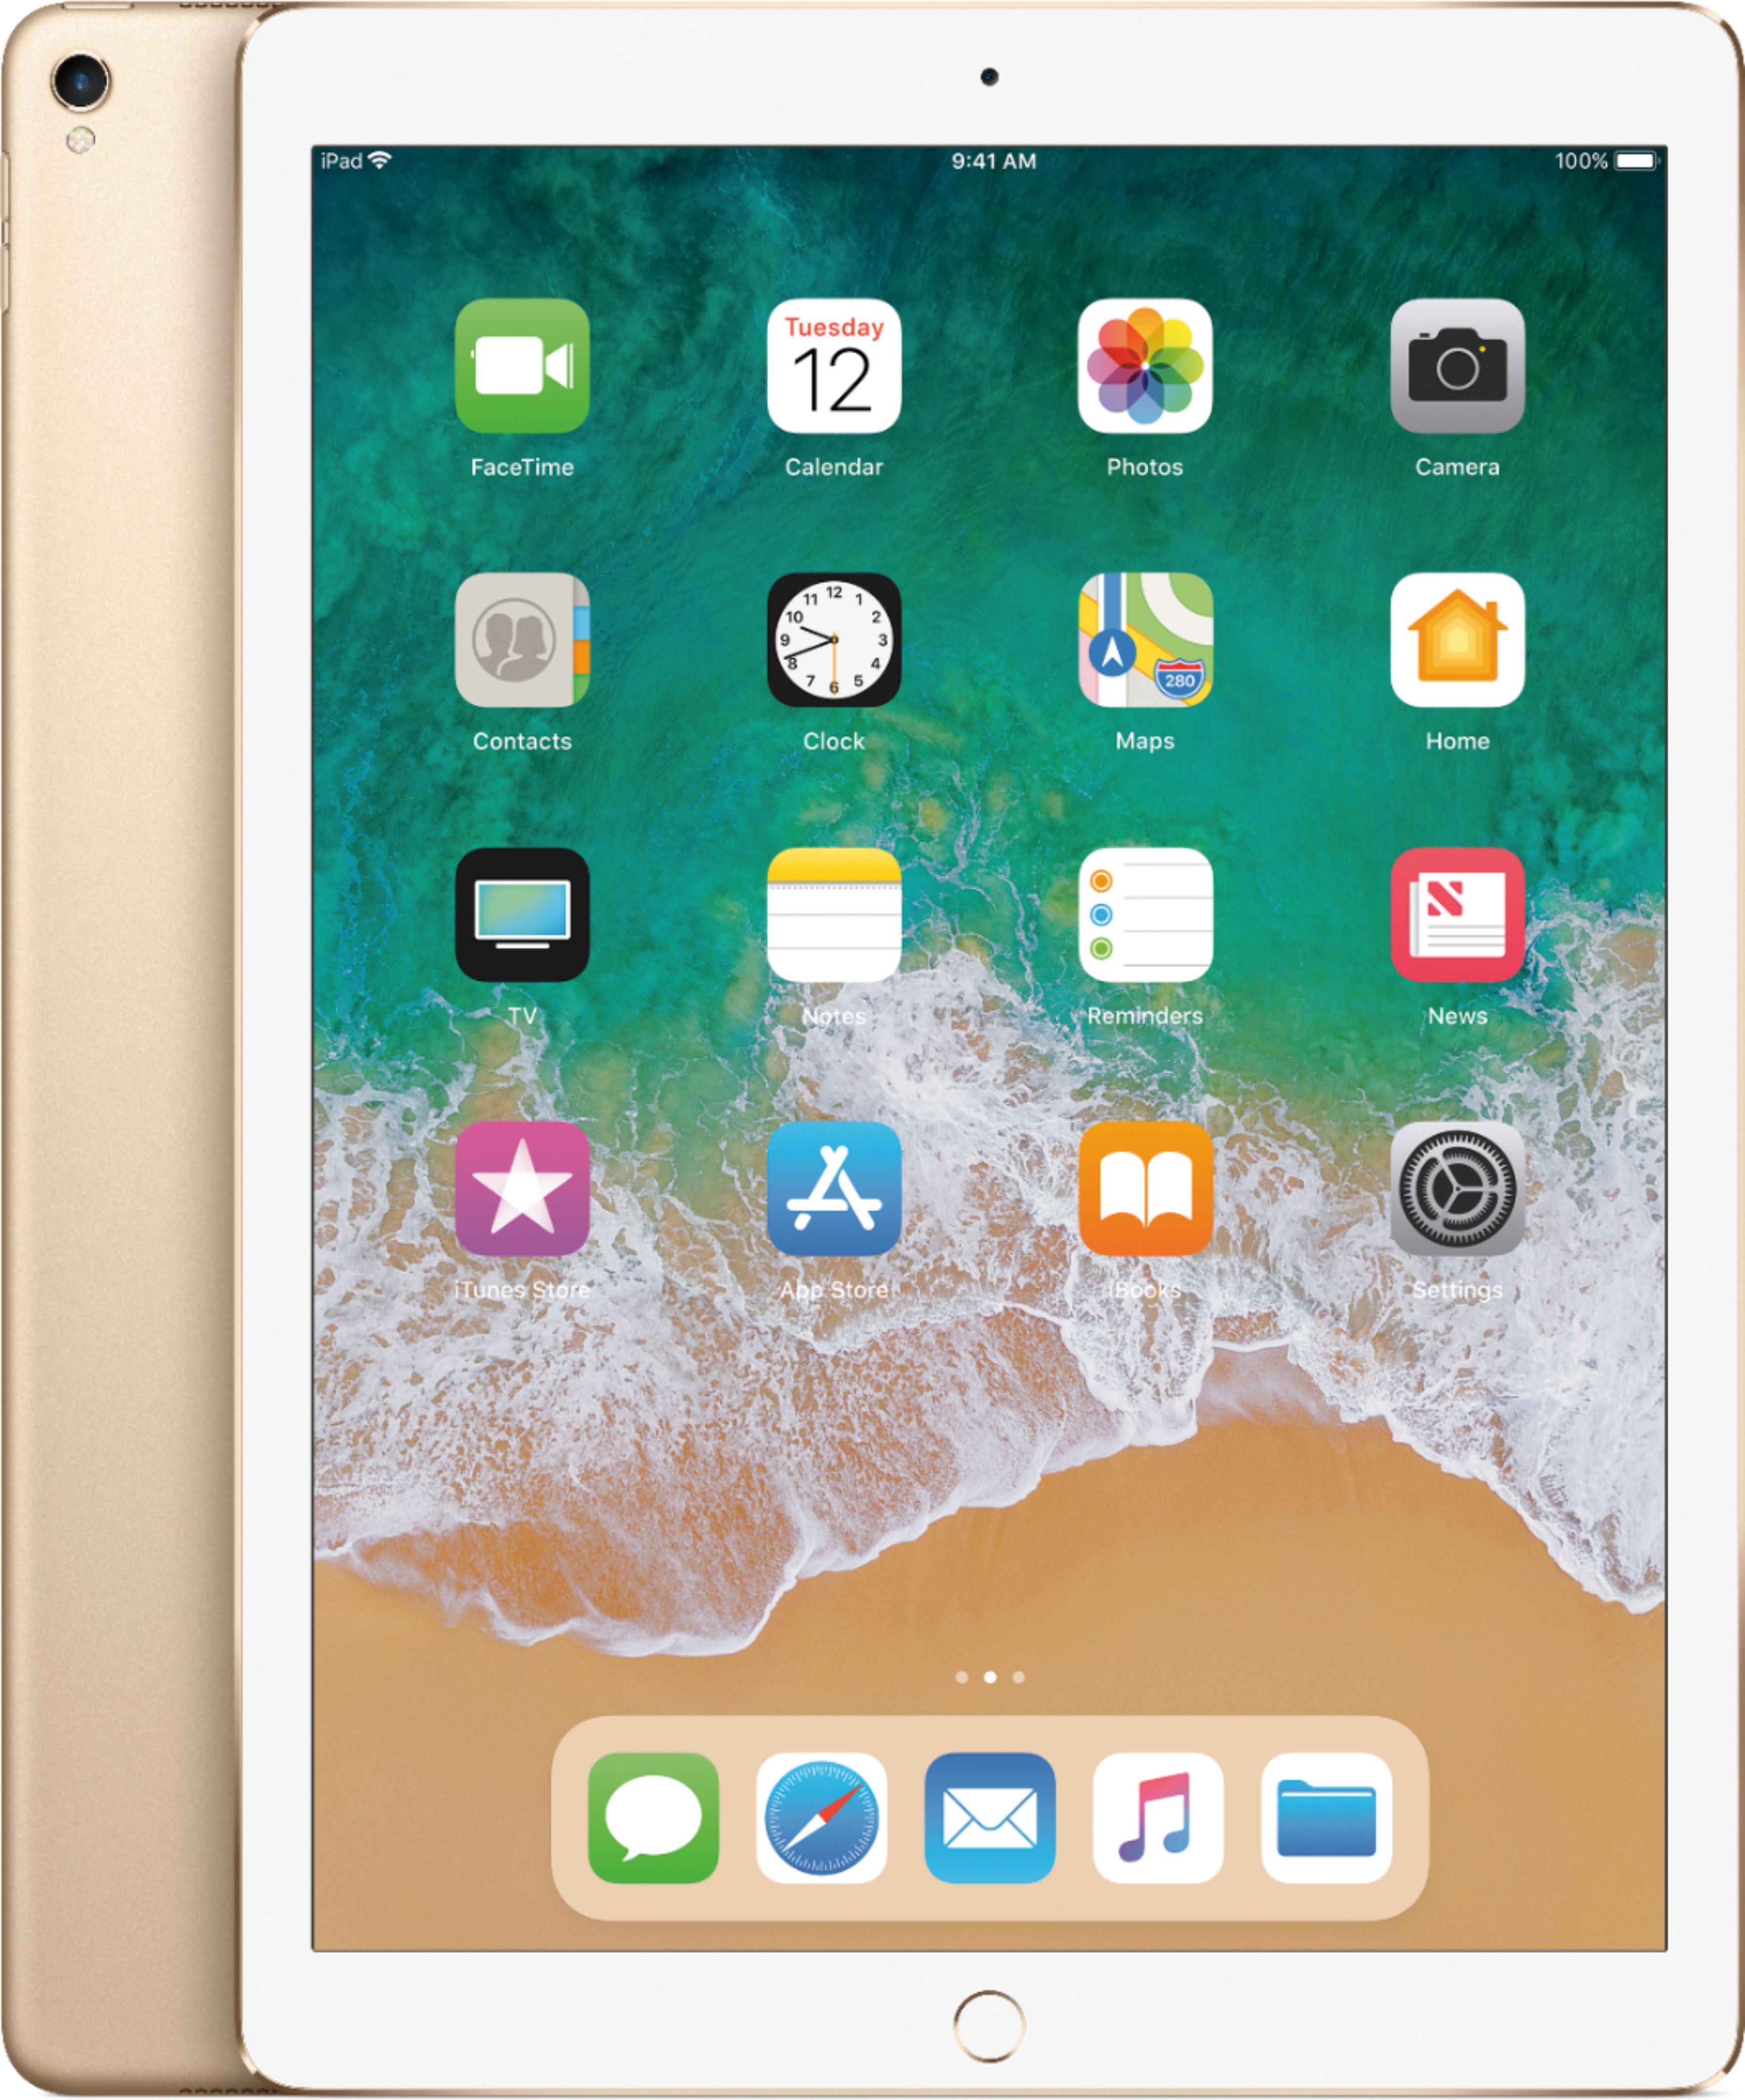 Apple iPad Pro 12.9-inch (2nd generation) with Wi-Fi + Cellular 256 GB Gold  MPA62LL/A - Best Buy